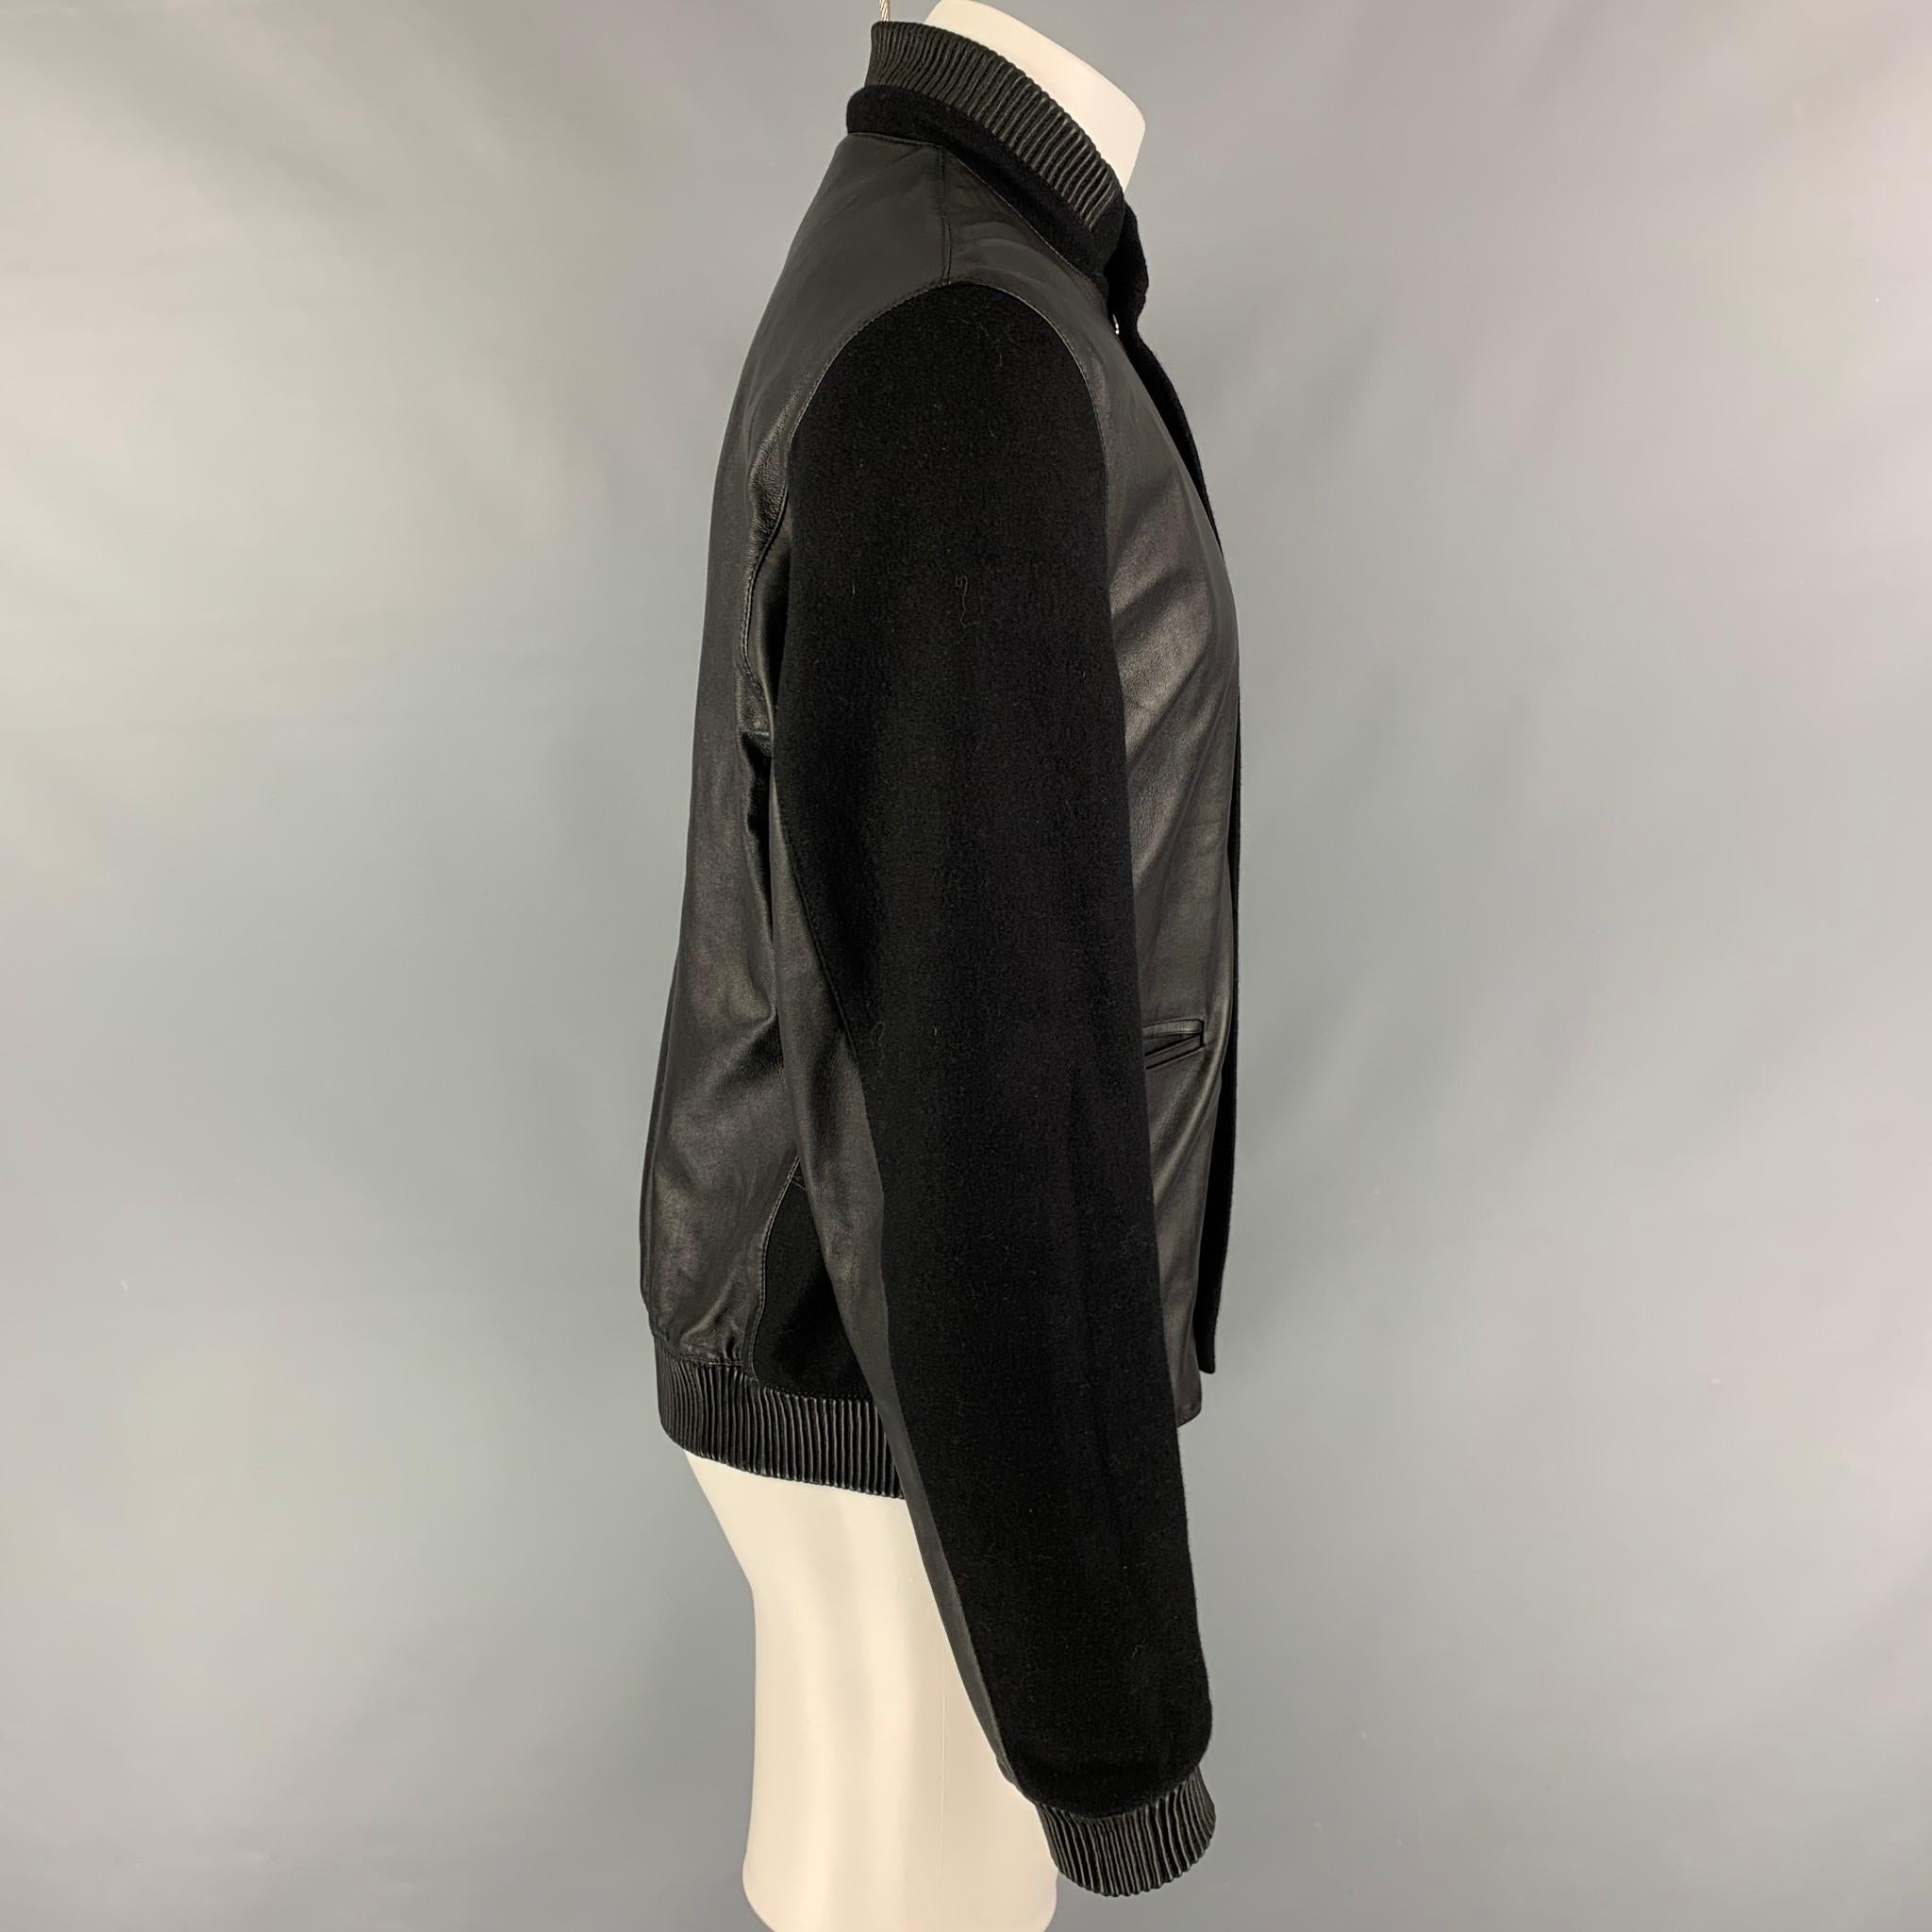 CALVIN KLEIN COLLECTION jacket comes in a black leather with a quilted liner featuring a bomber style, ribbed hem, front slit pockets, and a hidden zip & snap button closure. 

Excellent Pre-Owned Condition.
Marked: 50 /